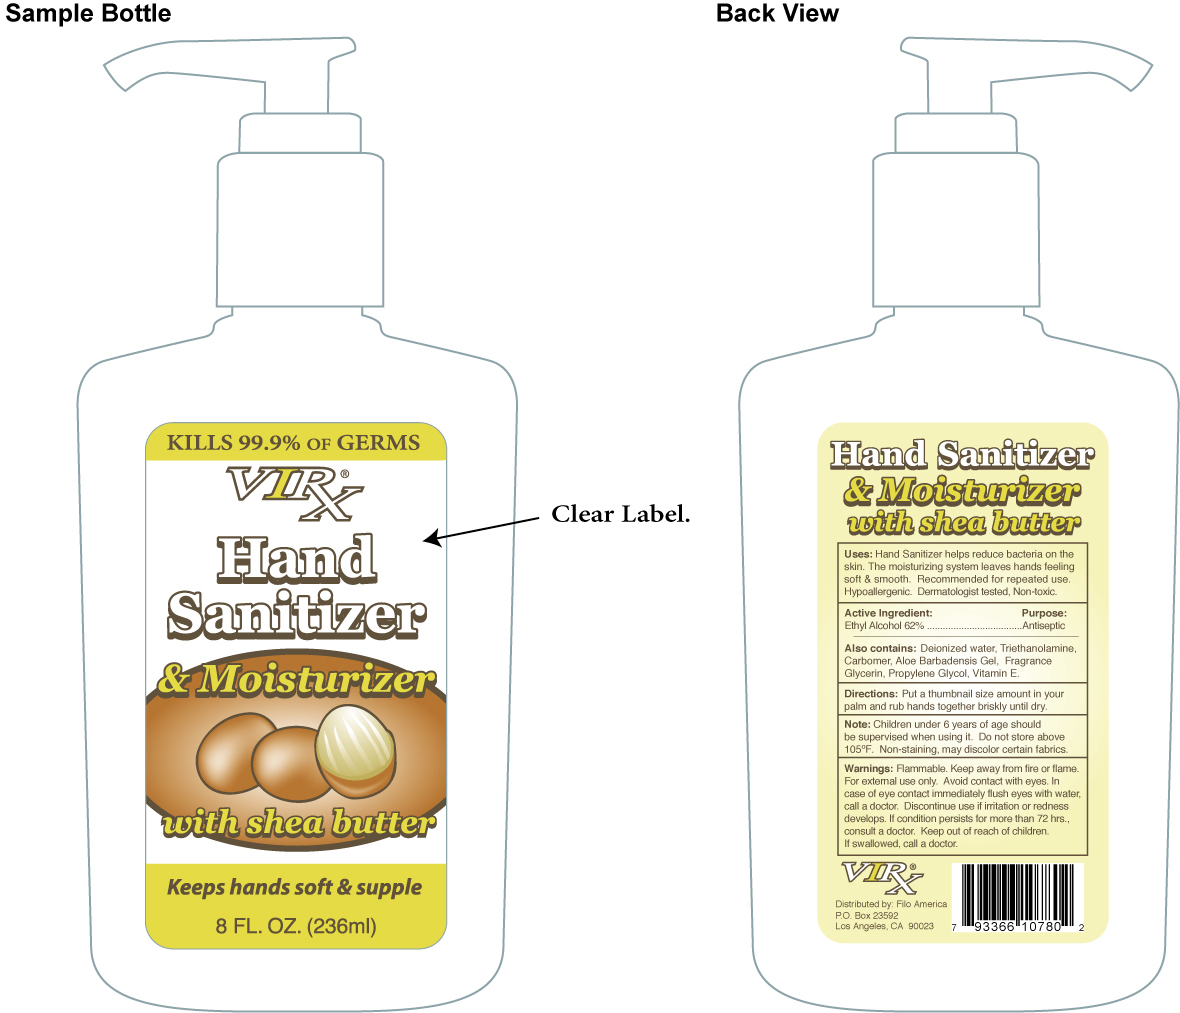 Image of Sanitizer Shea Butter Container